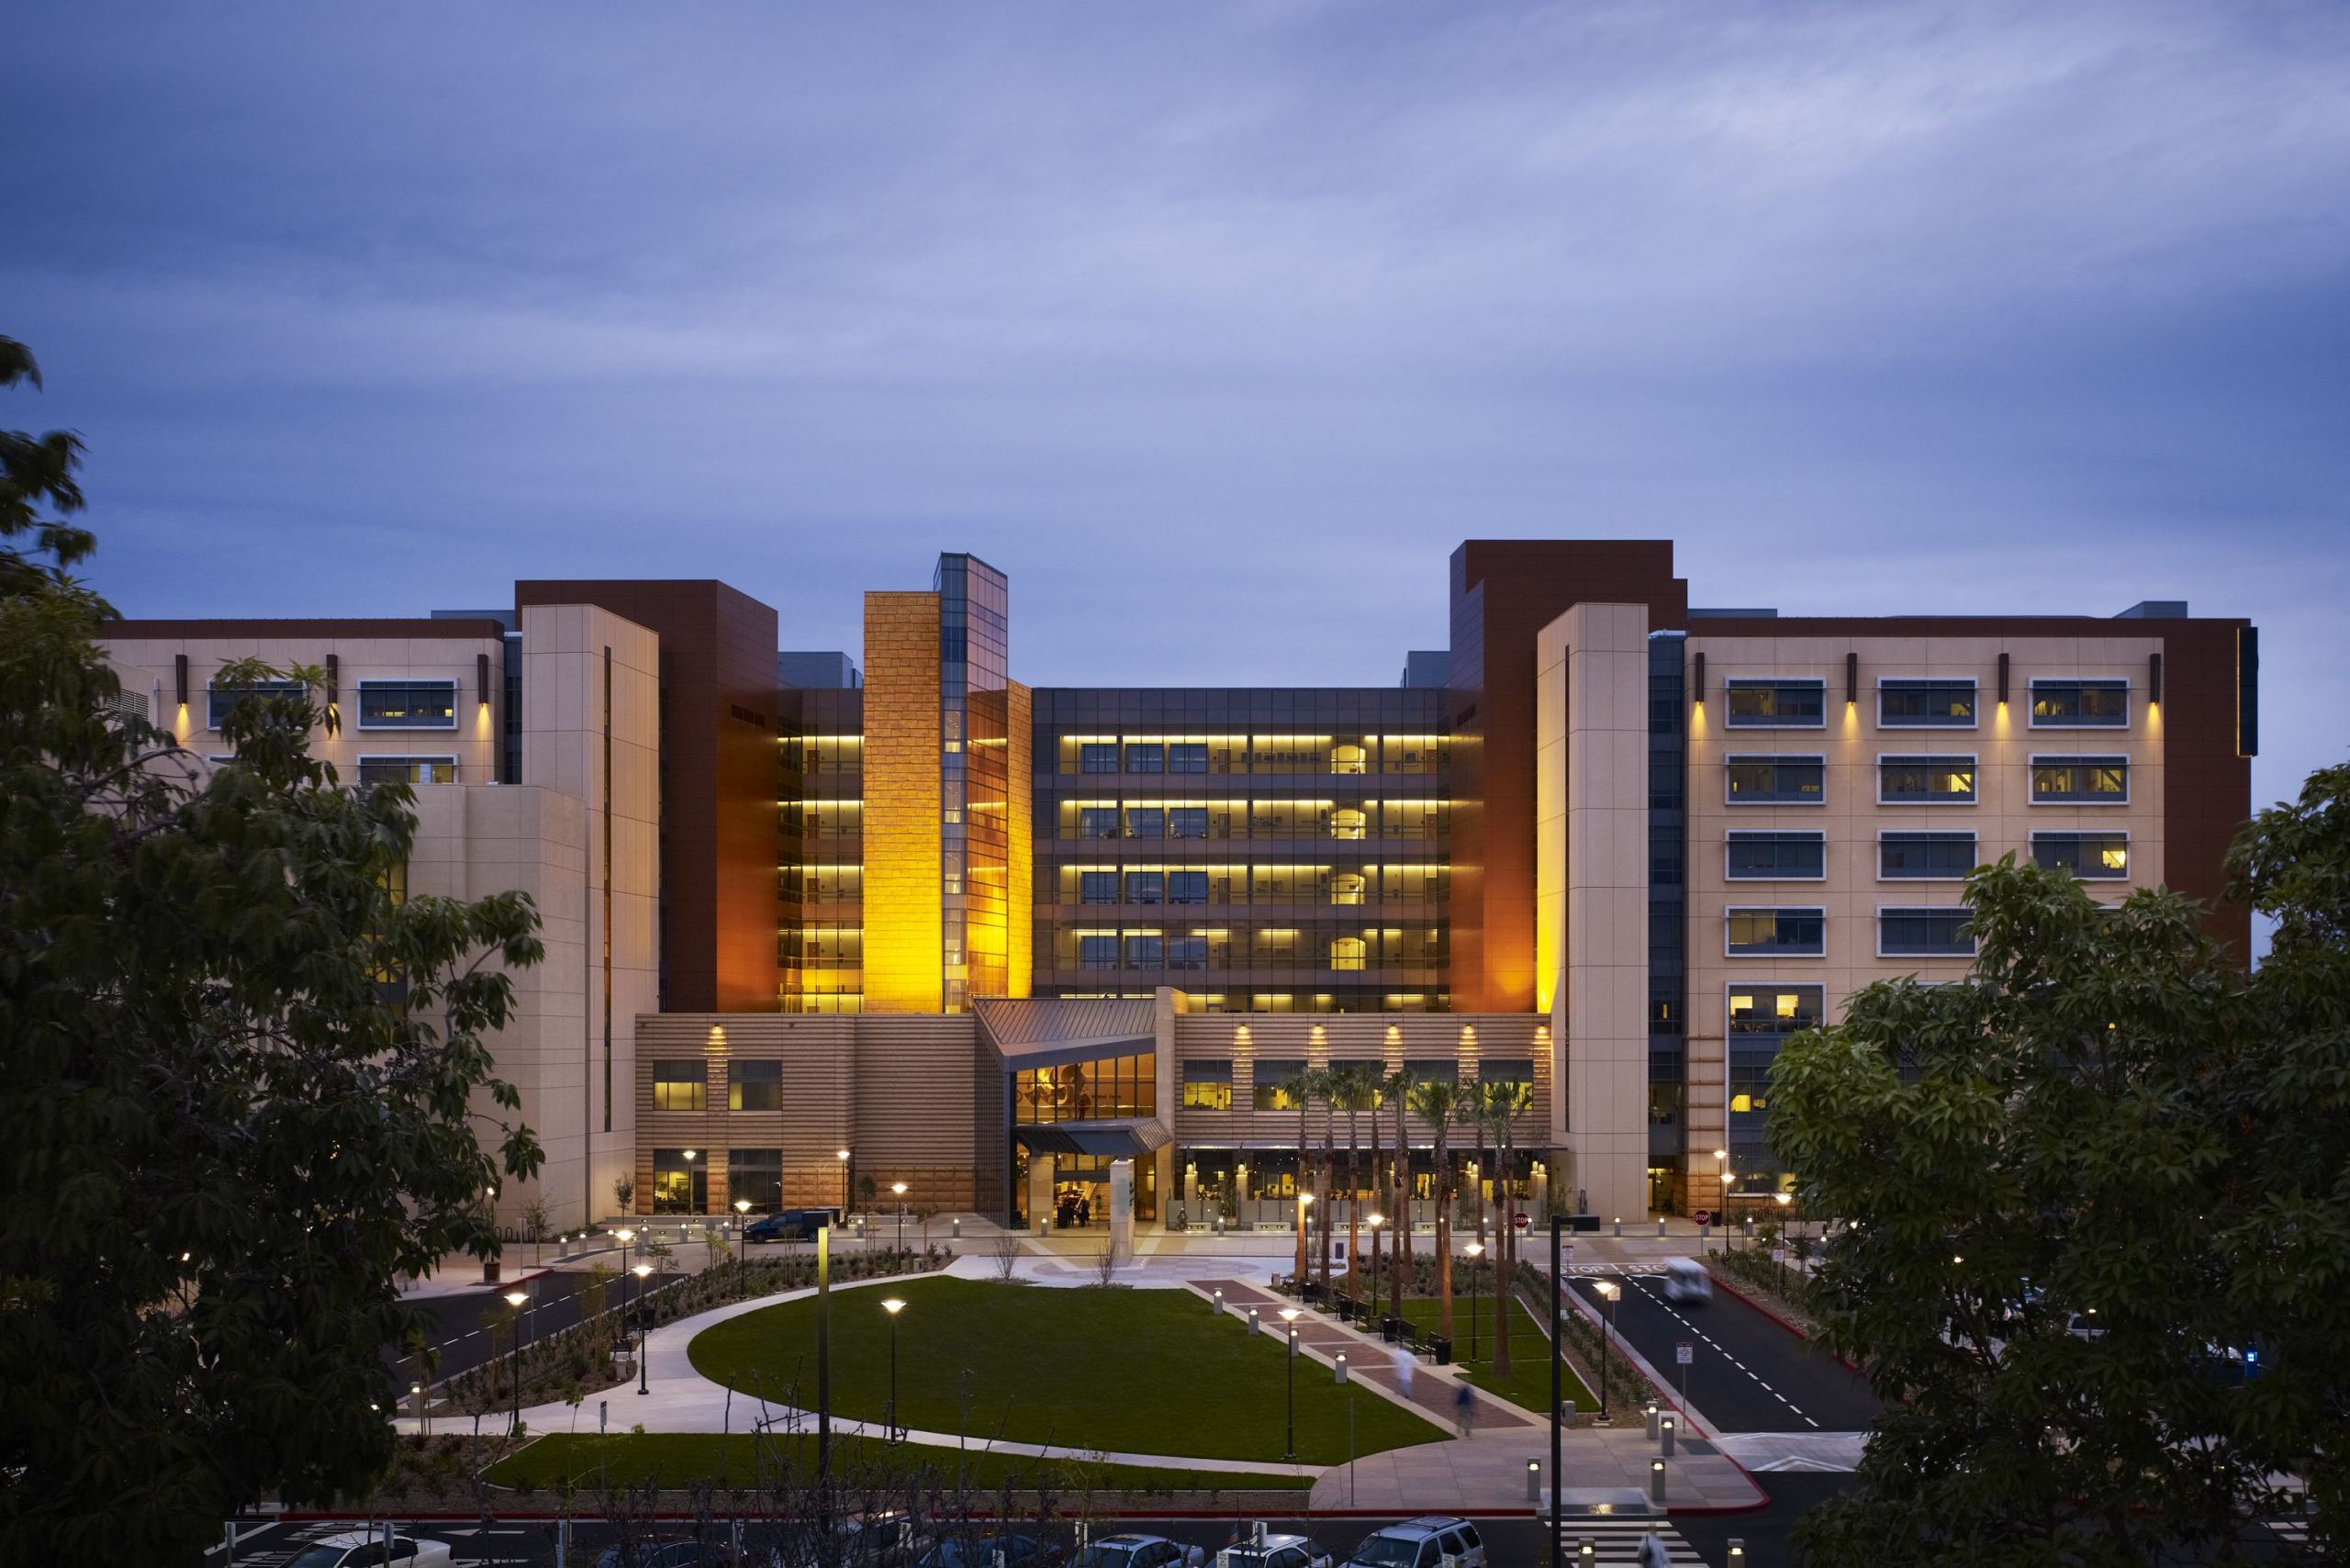 uci medical center is the site of a study testing for undetected covid-19 in healthcare staff